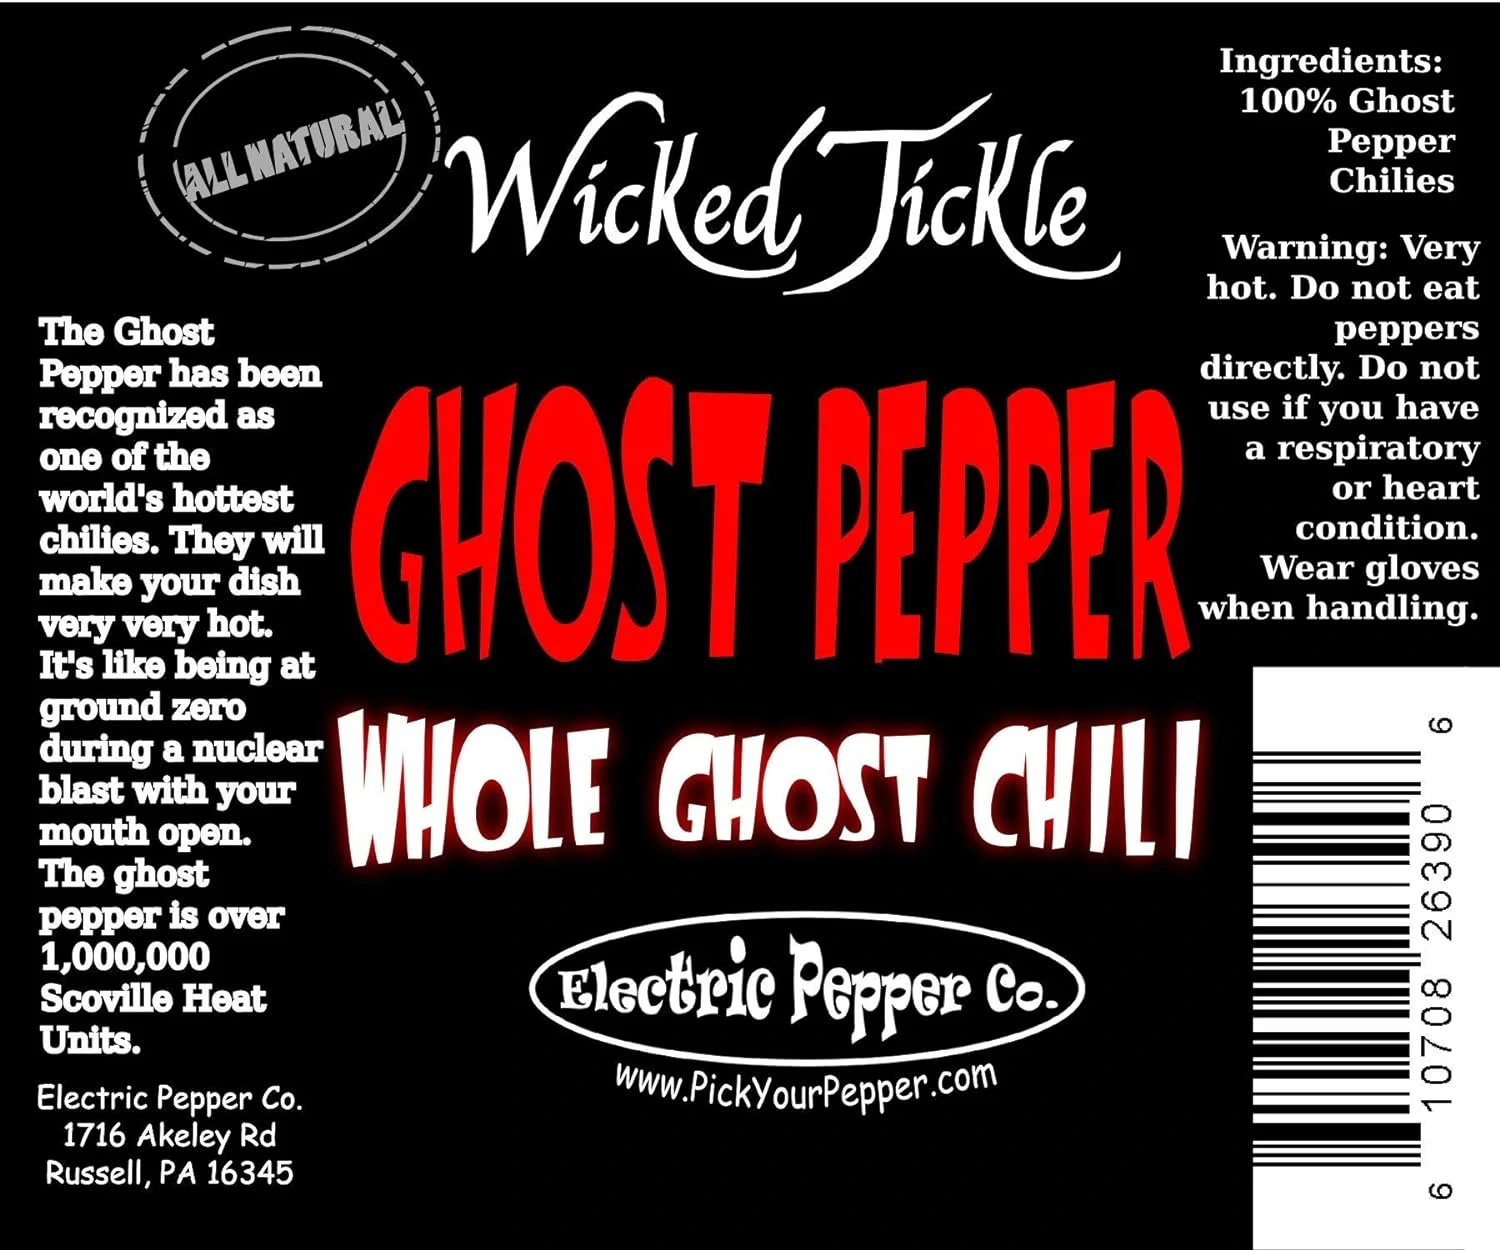 Product Label For Wicked Tickle Ghost Peppers - 
7 Count